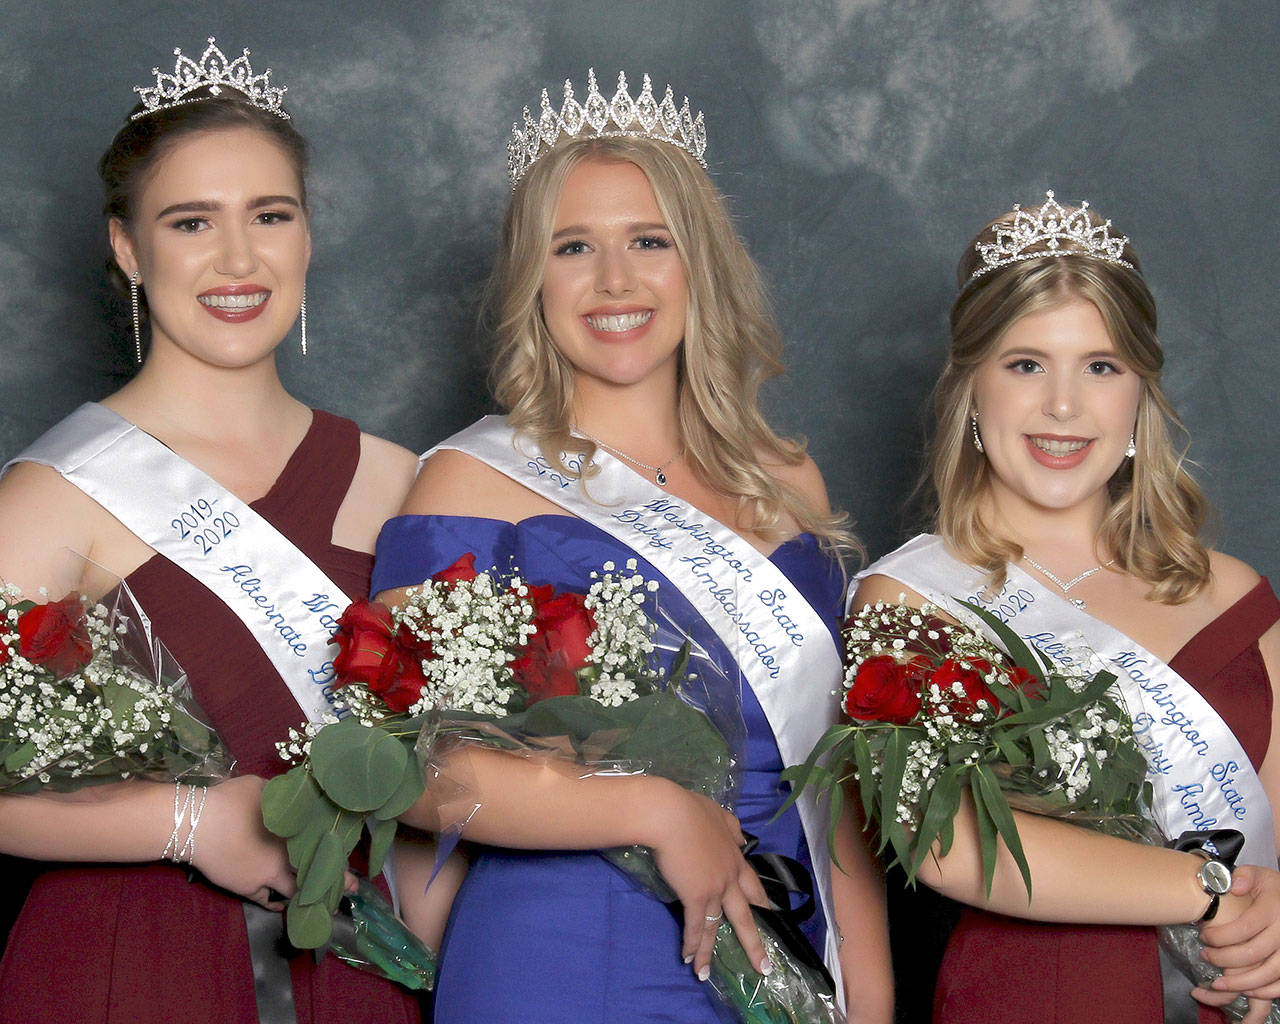 Kara Teachman, Kayla VanWieringen, Emily Rockey pose for a photo after being coronated by the Dairy Farmers of Washington to be representatives of the association. VanWieringen of Yakima Valley is the 2019 Washington State Dairy Ambassador. Rockey of Elma and Teachman of Seattle-Pierce counties were named as equal alternates. (Photo courtesy Washington State Dairy Ambassador Program)